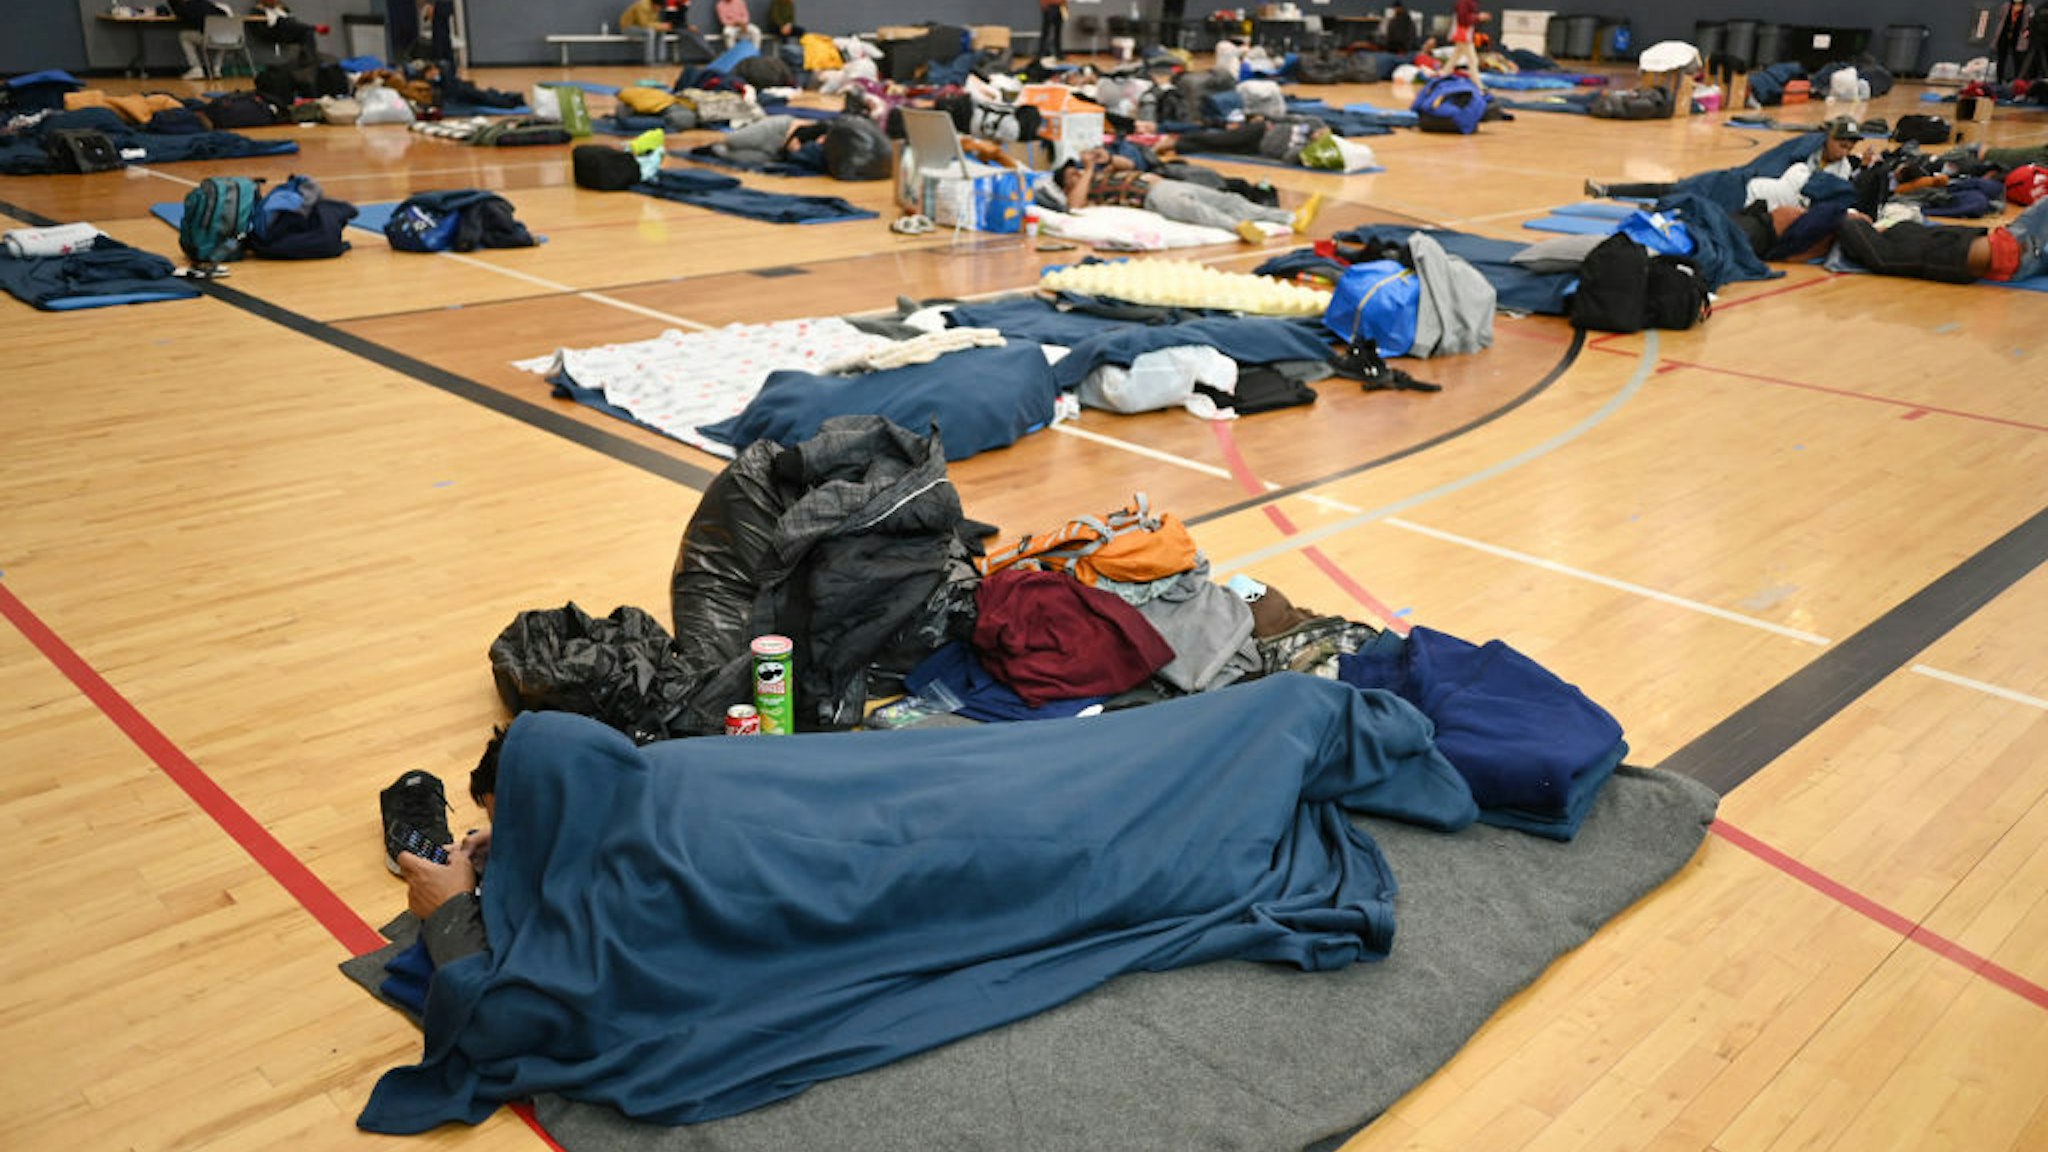 DENVER, CO - JANUARY 13 : Migrants share the space at a makeshift shelter in Denver, Colorado on Friday, January 13, 2023. (Photo by Hyoung Chang/The Denver Post)